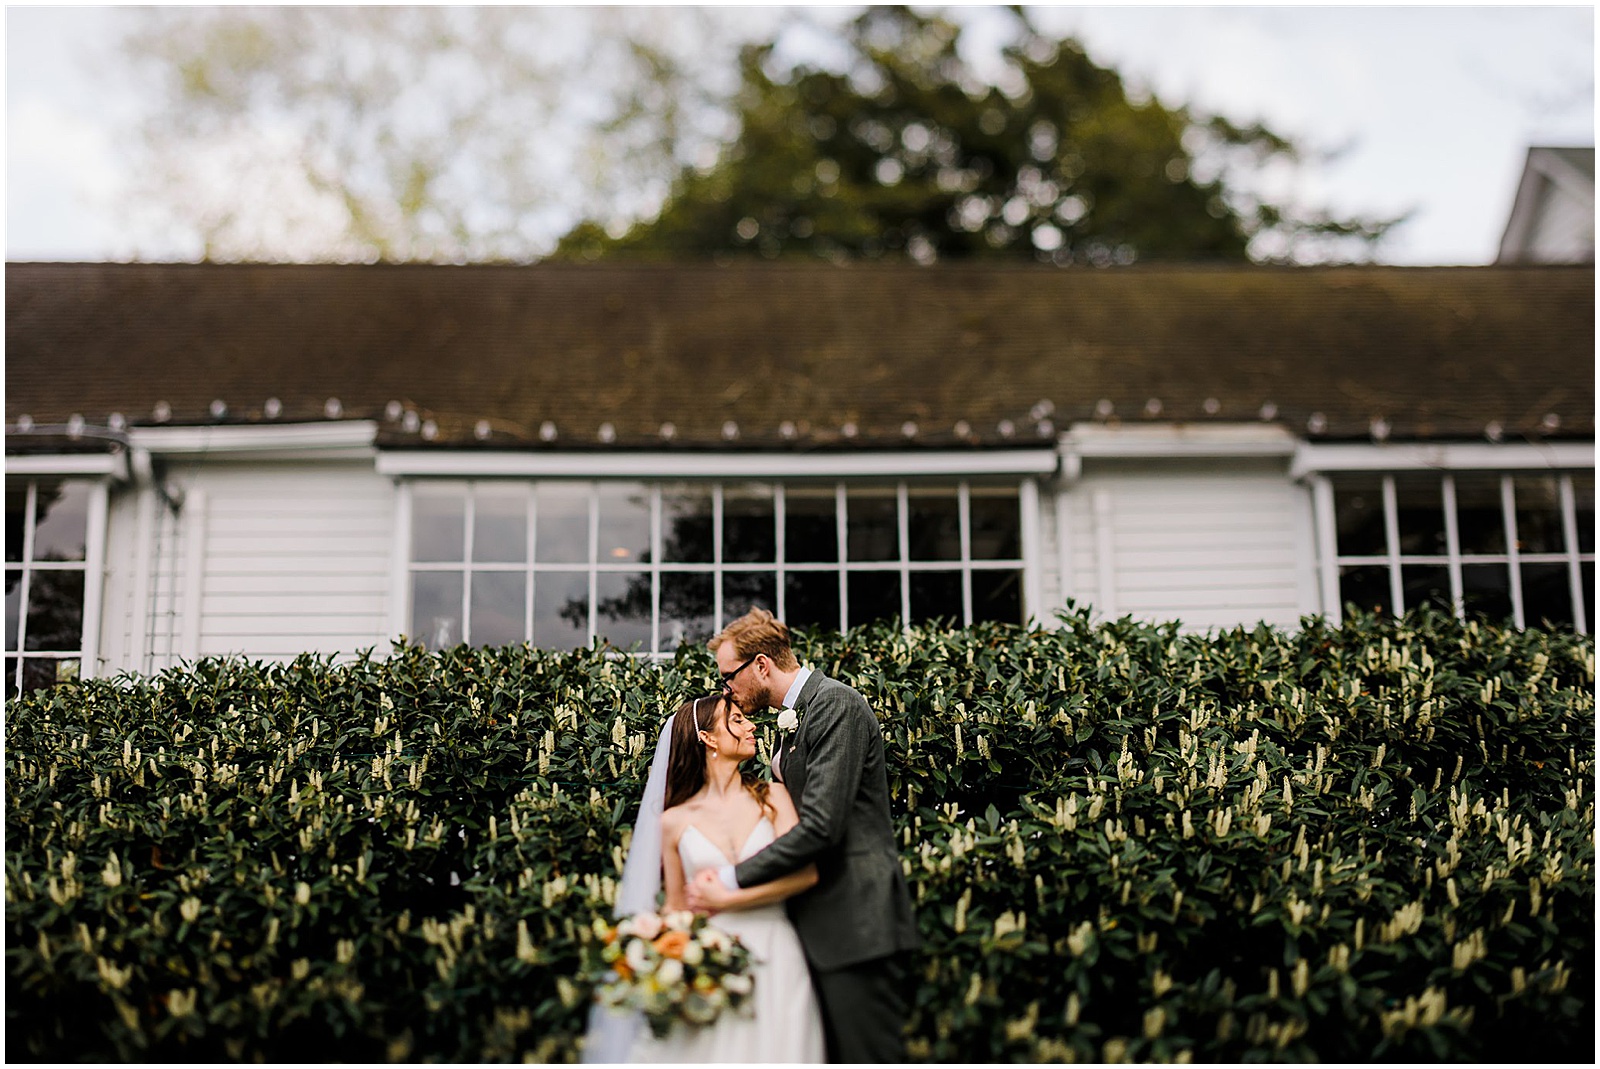 A bride and groom pose in front of a flowering bush at a New Jersey wedding venue.